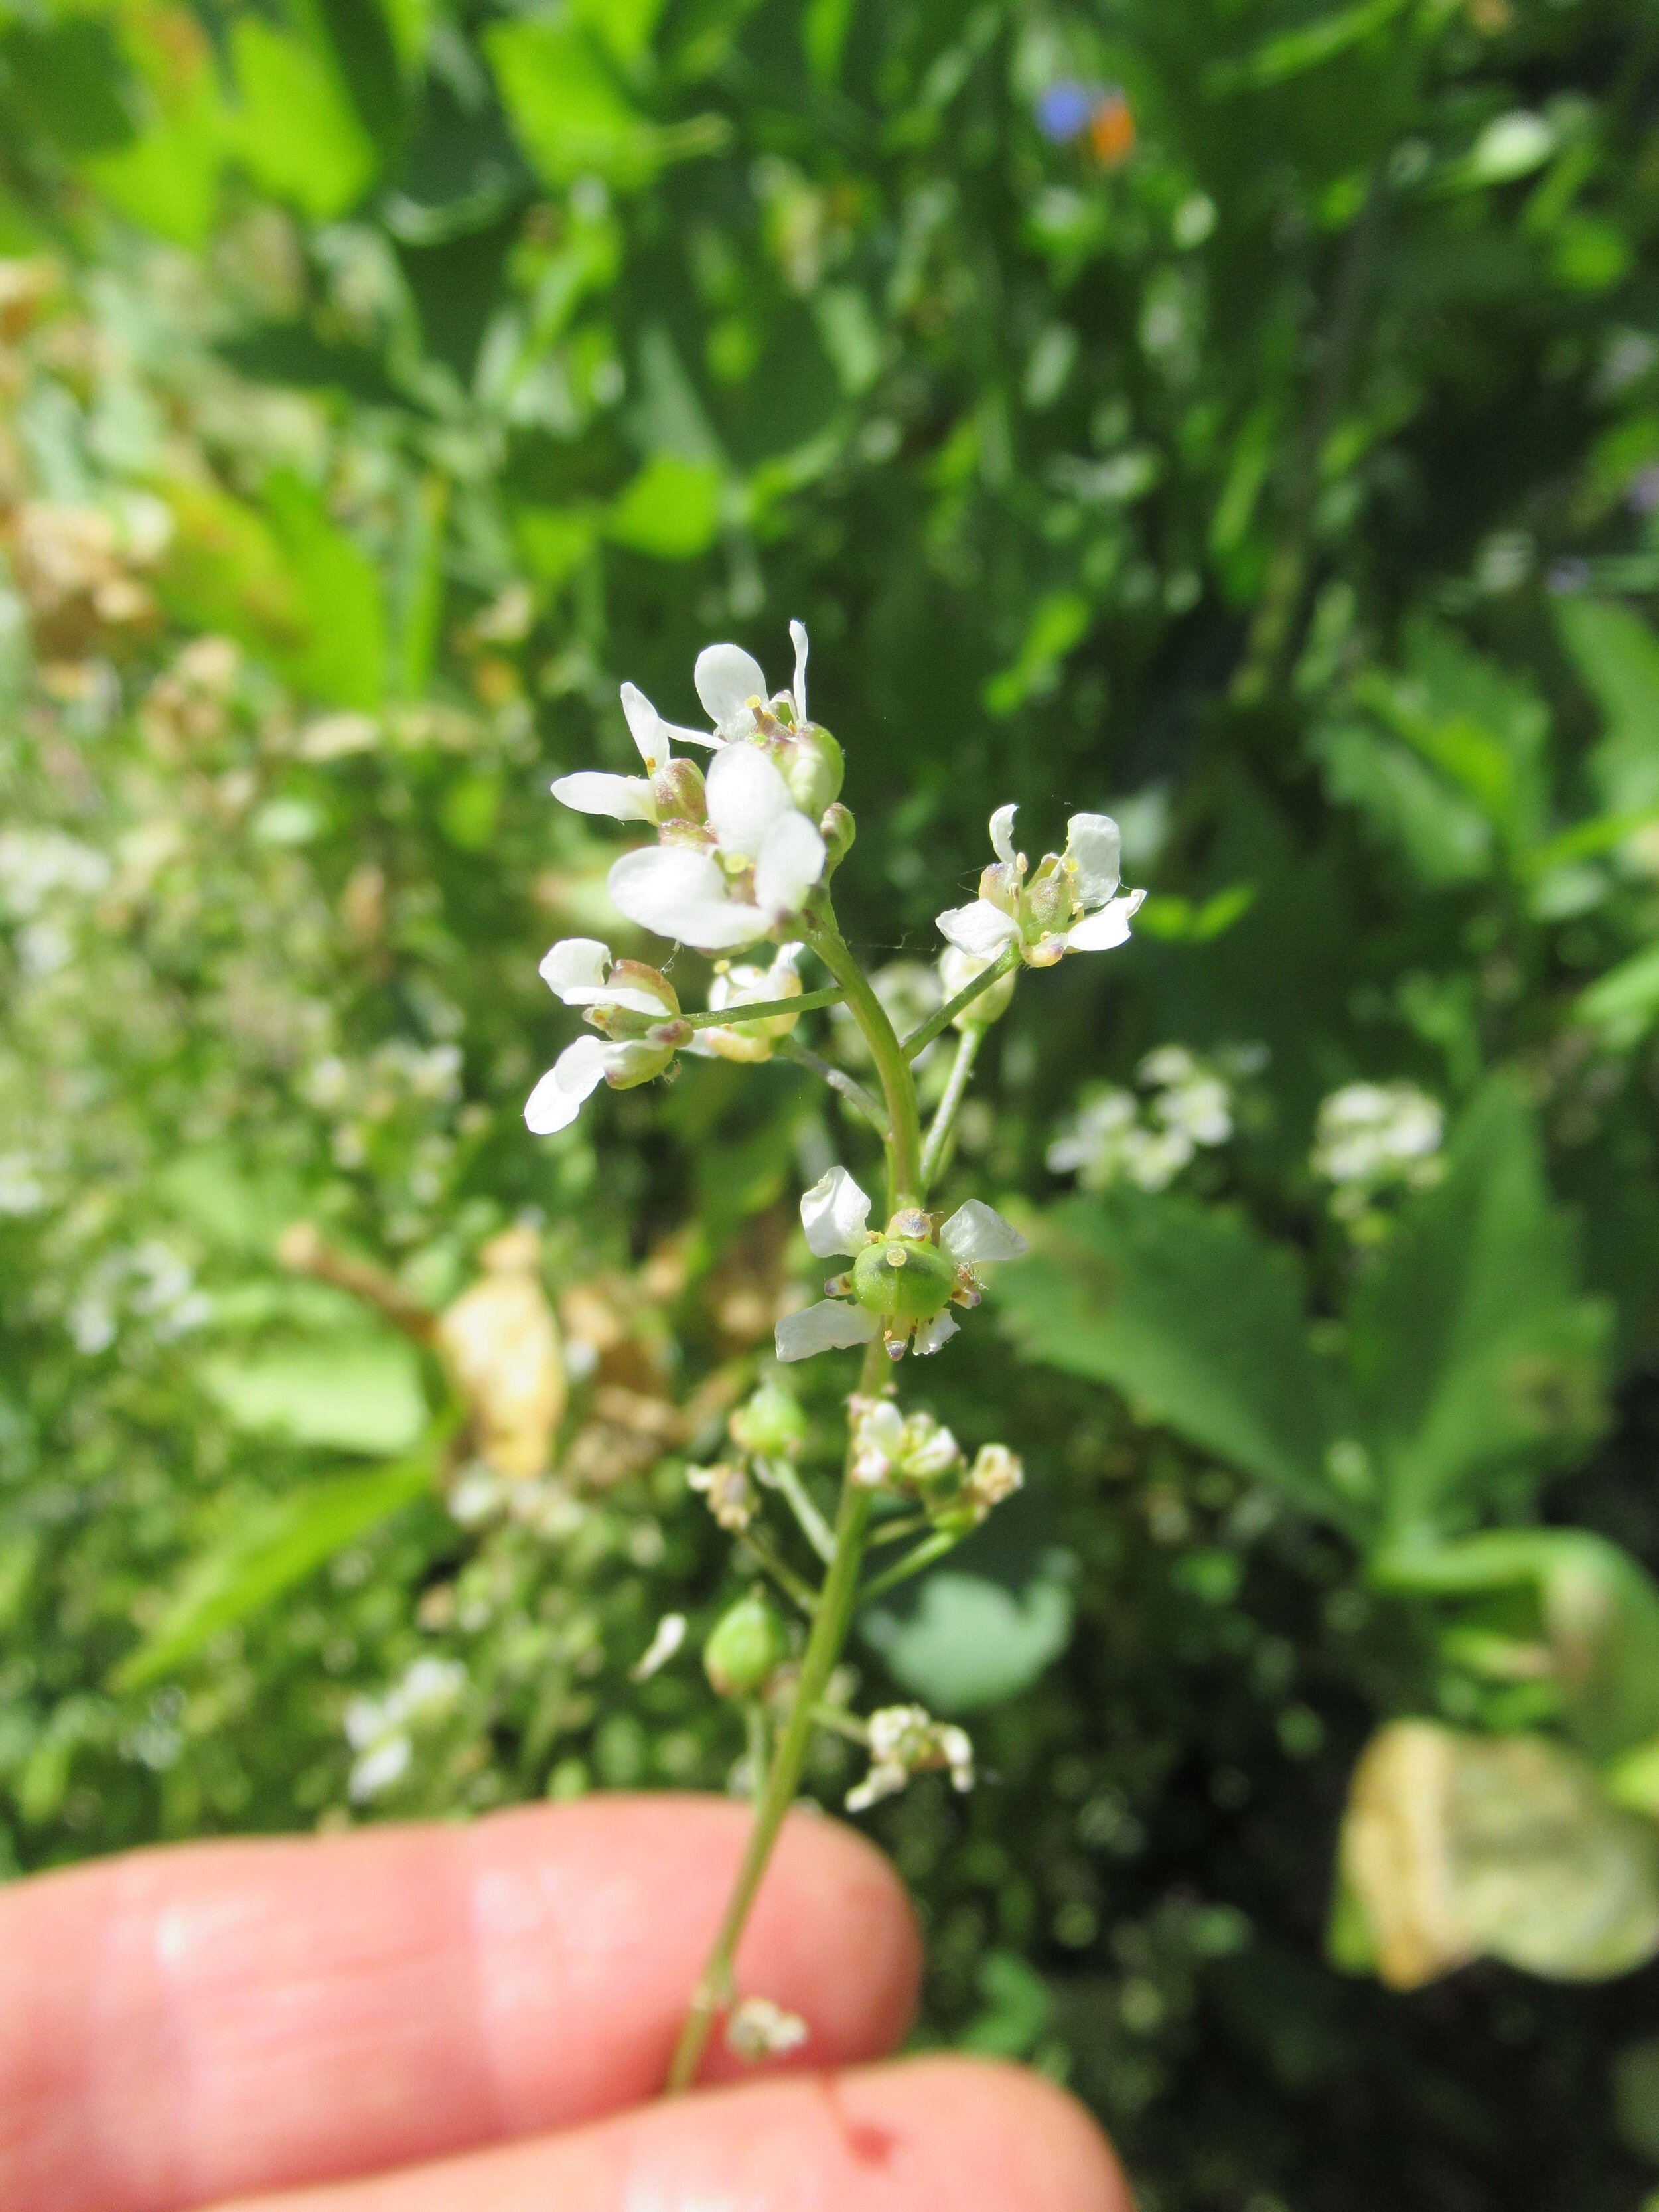  Scurvy Grass, Cochlearia officinalis 